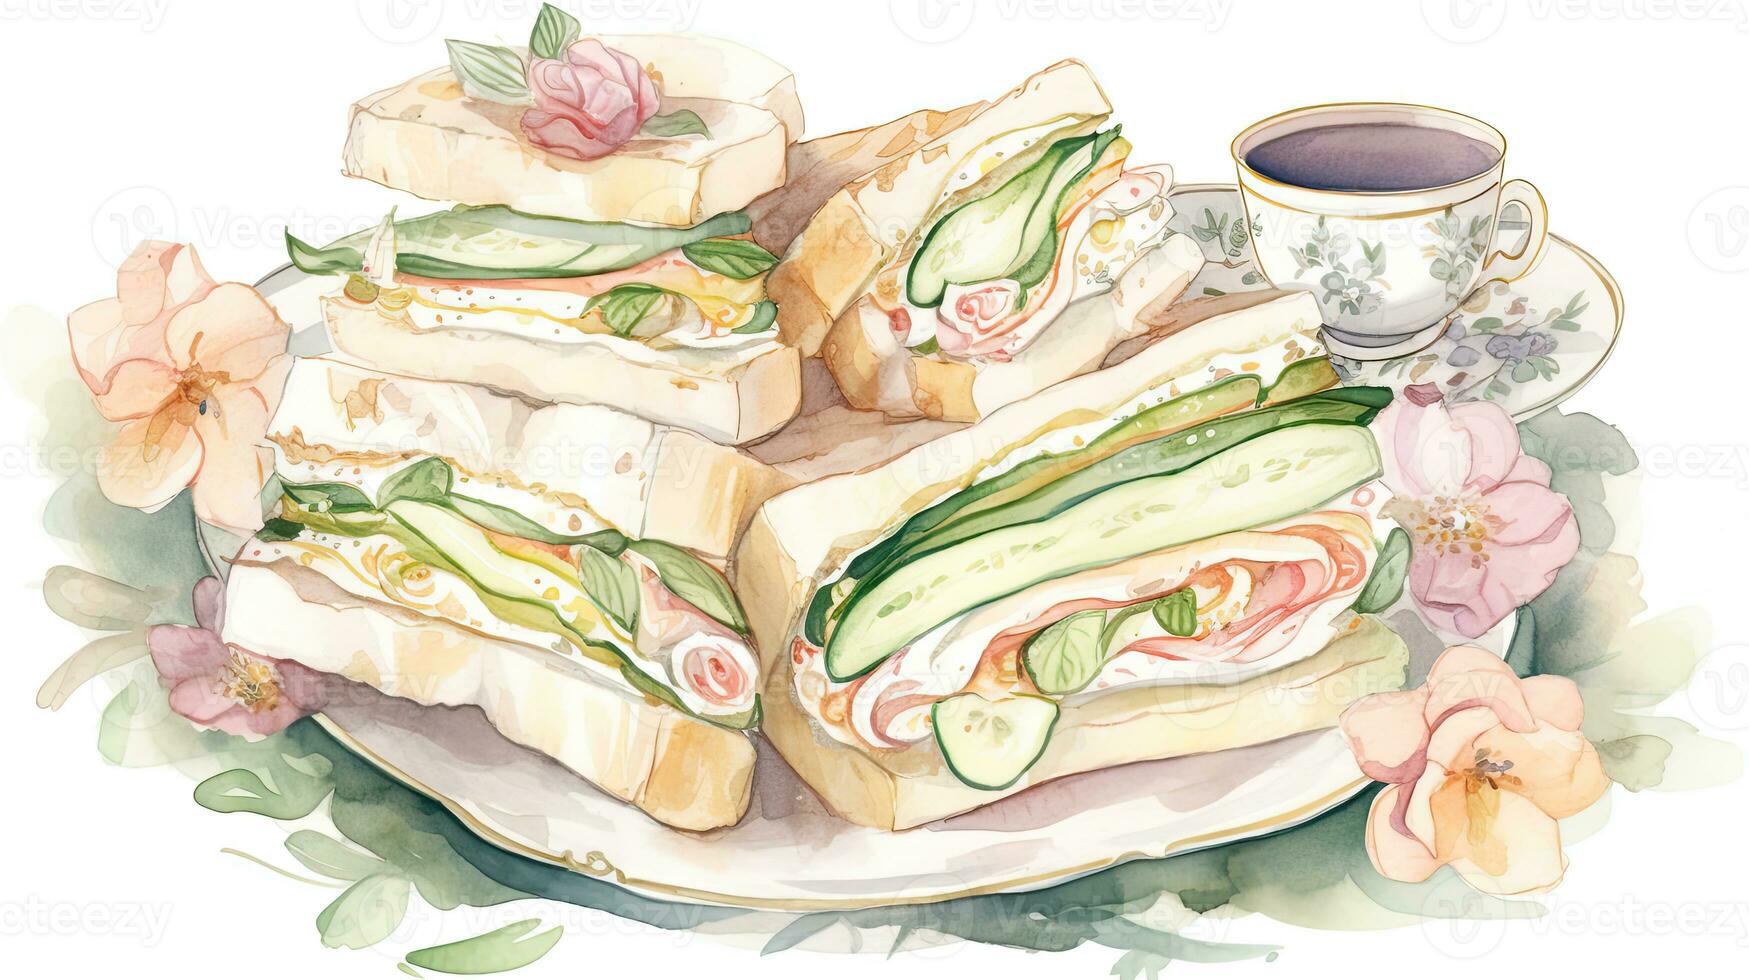 Herb Food Watercolor Painting of Sandwich Comestible Plate with Flower and Tea Cup for Party Concept. photo